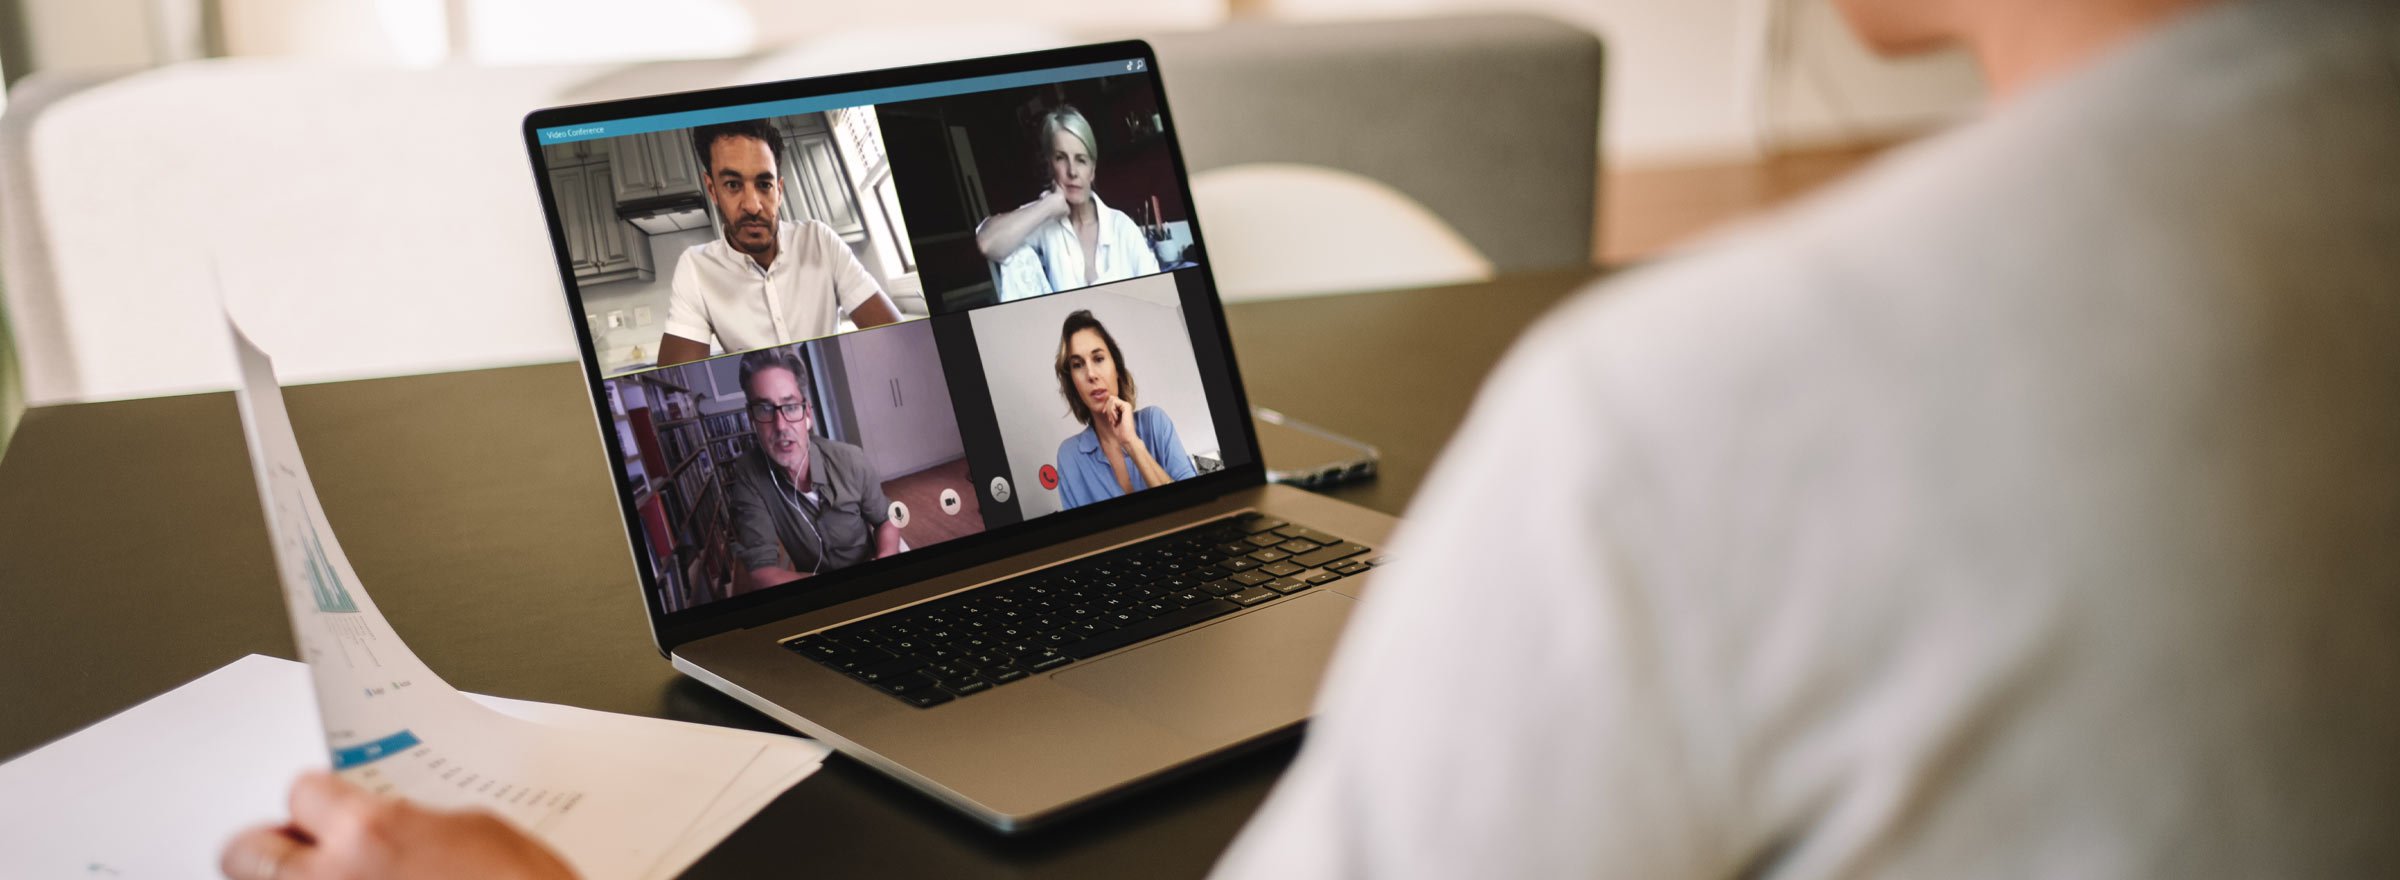 rear view of someone having a video conference with four people